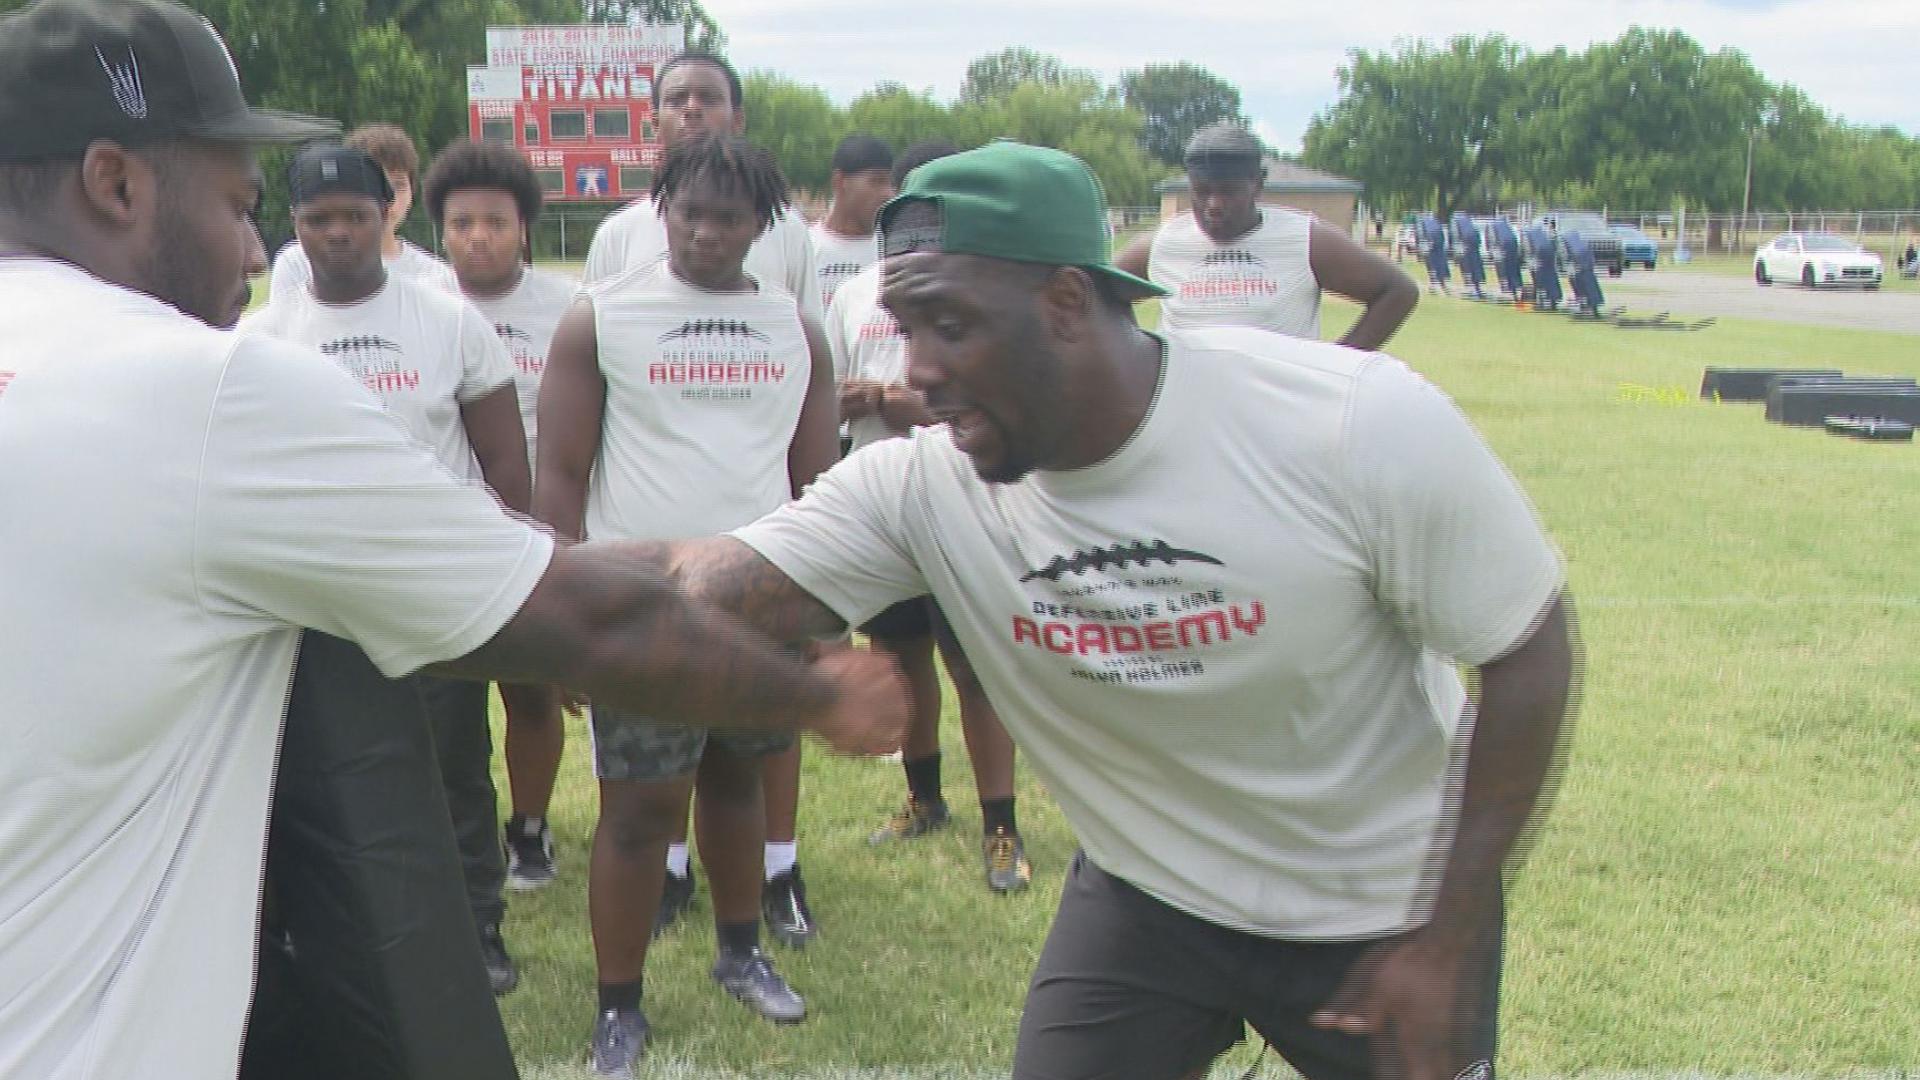 The former Lake Taylor Titan had a camp for lineman at his alma mater, but also talked about mental health and life lessons.